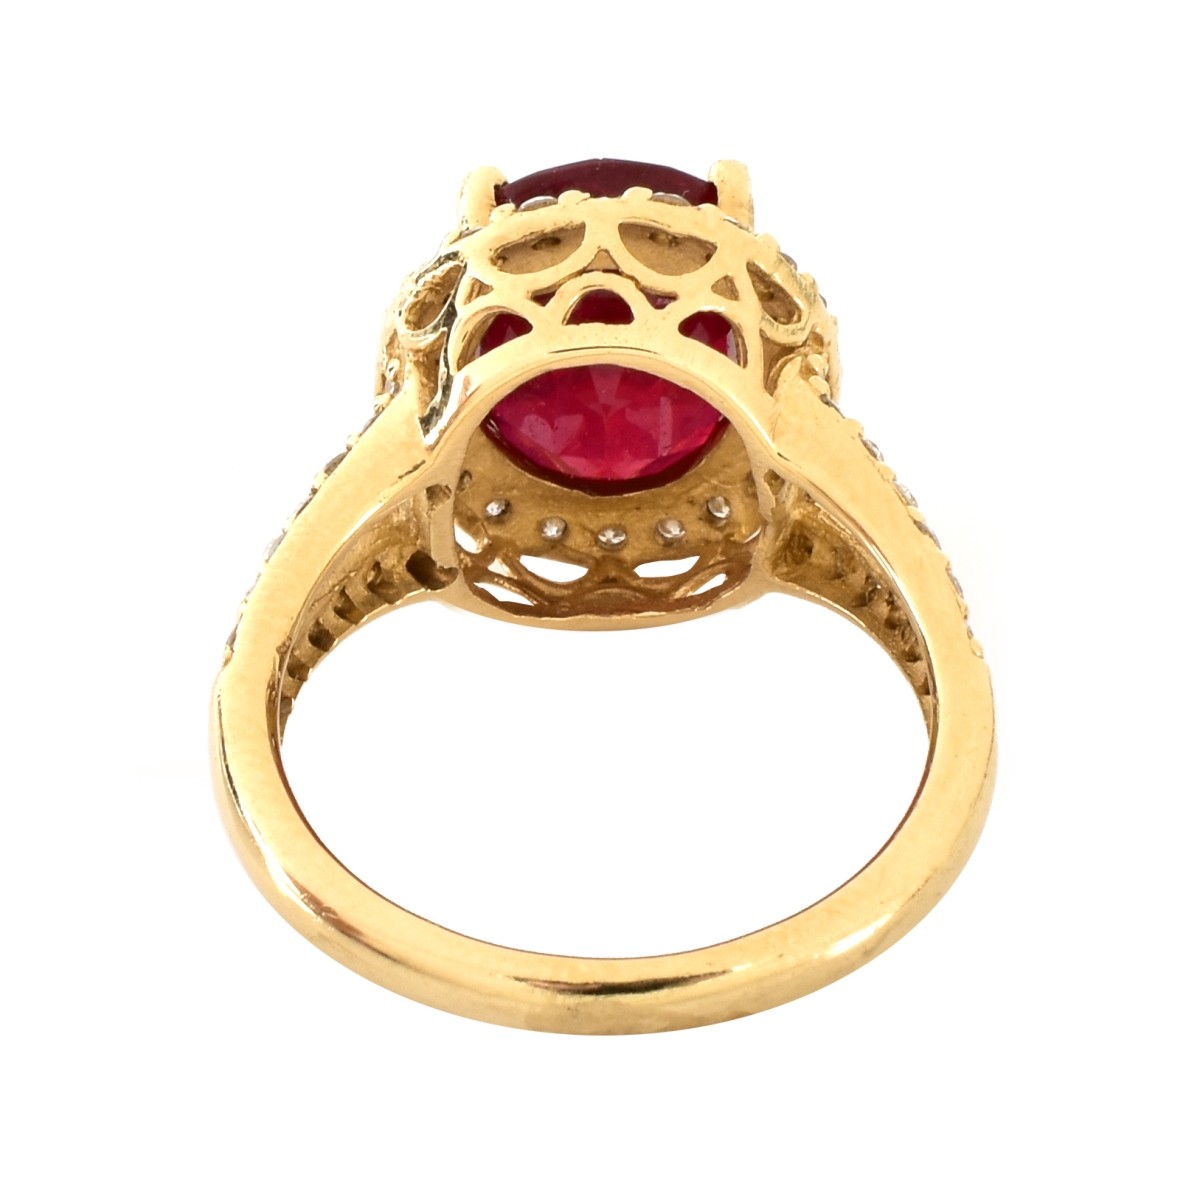 Ruby, Diamond and 14K Gold Ring